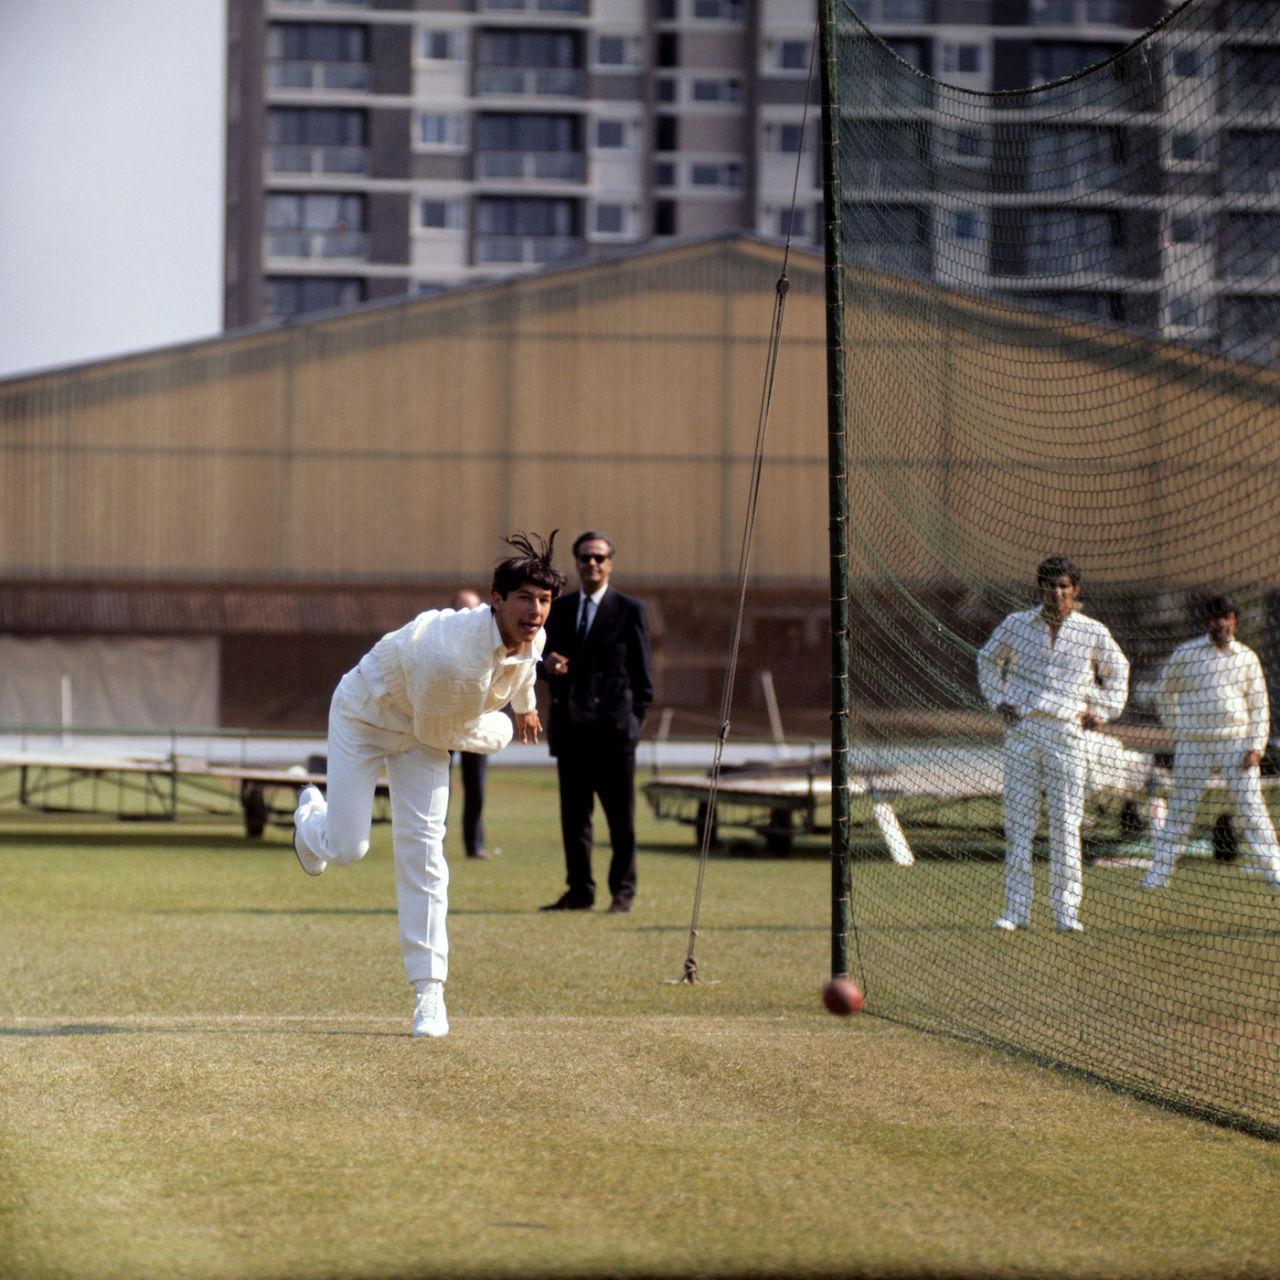 Imran Khan bowls in the nets at Lord's before Pakistan's tour of England begins, Lord's, April 30, 1971